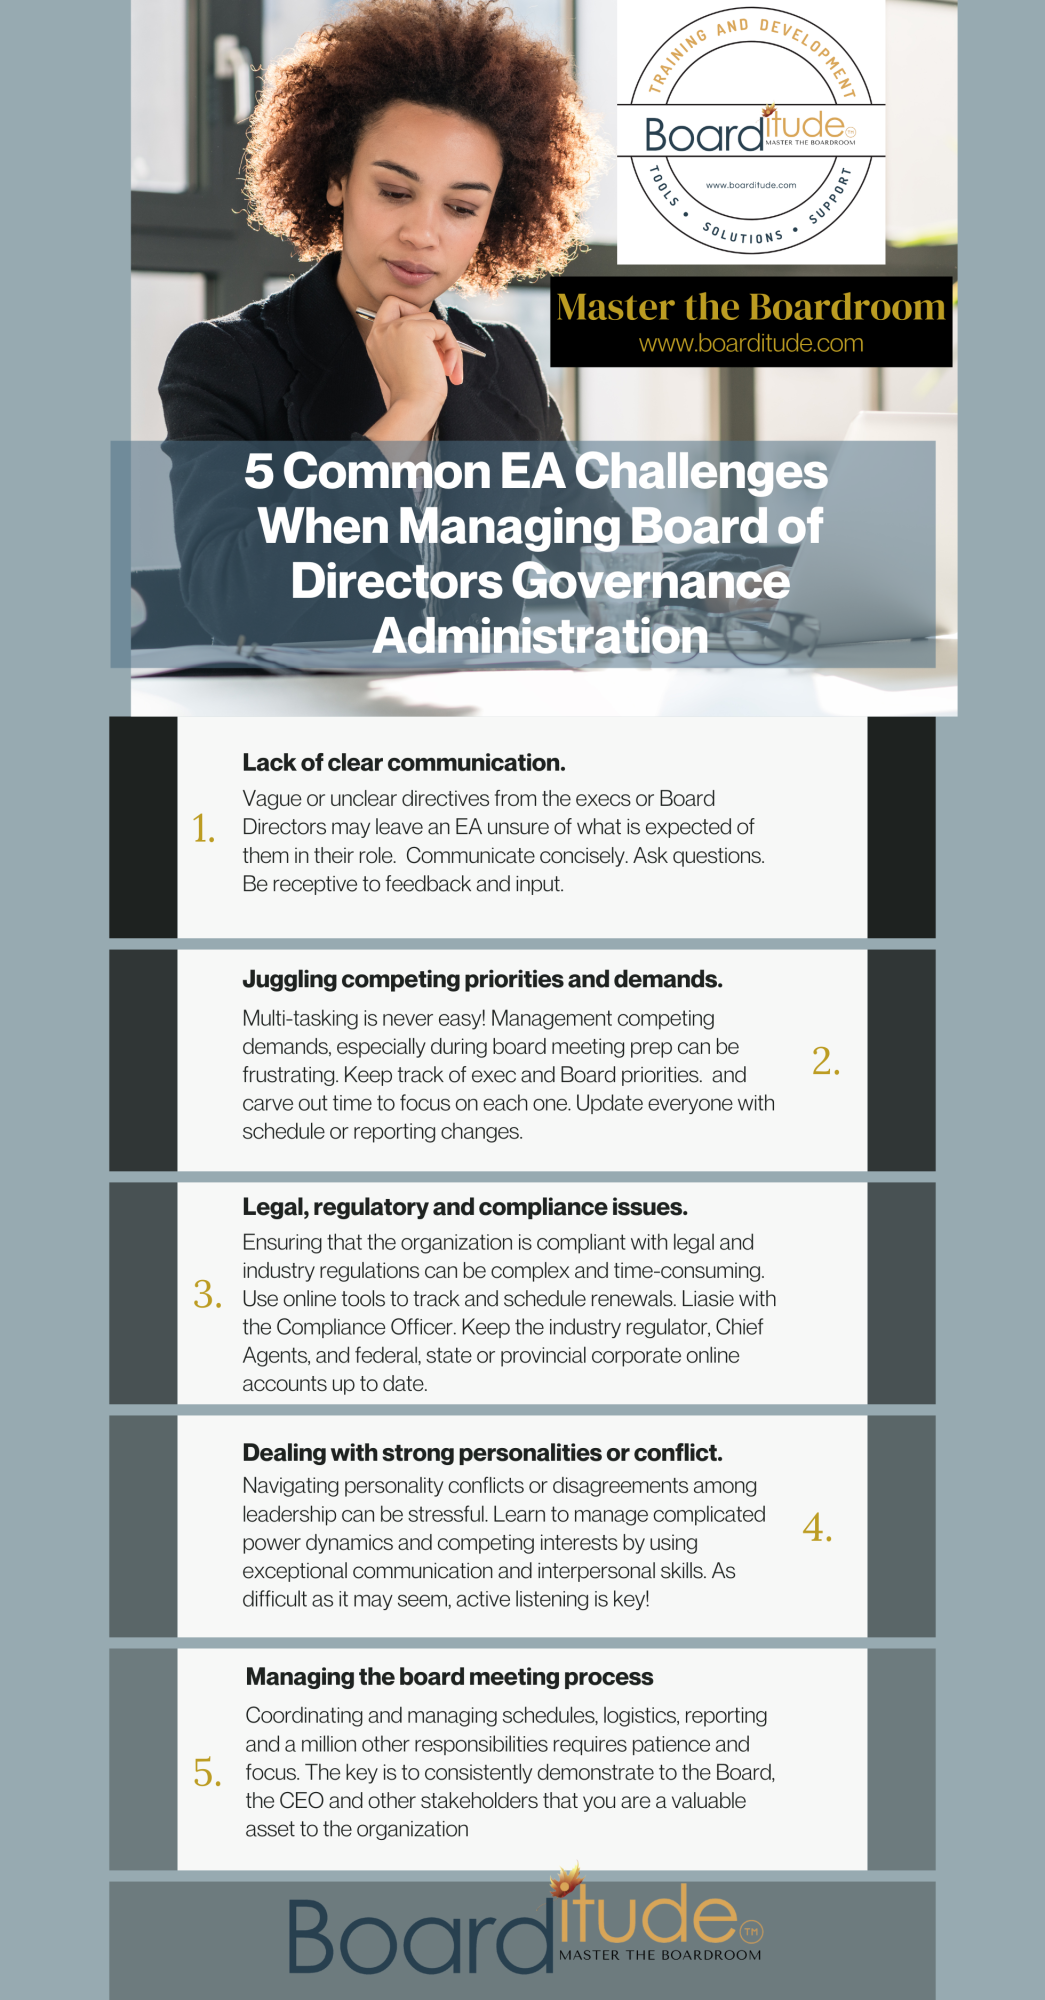 Master the Boardroom with Boarditude: 5 Common EA Challenges  When Managing Board of Directors Governance Administration